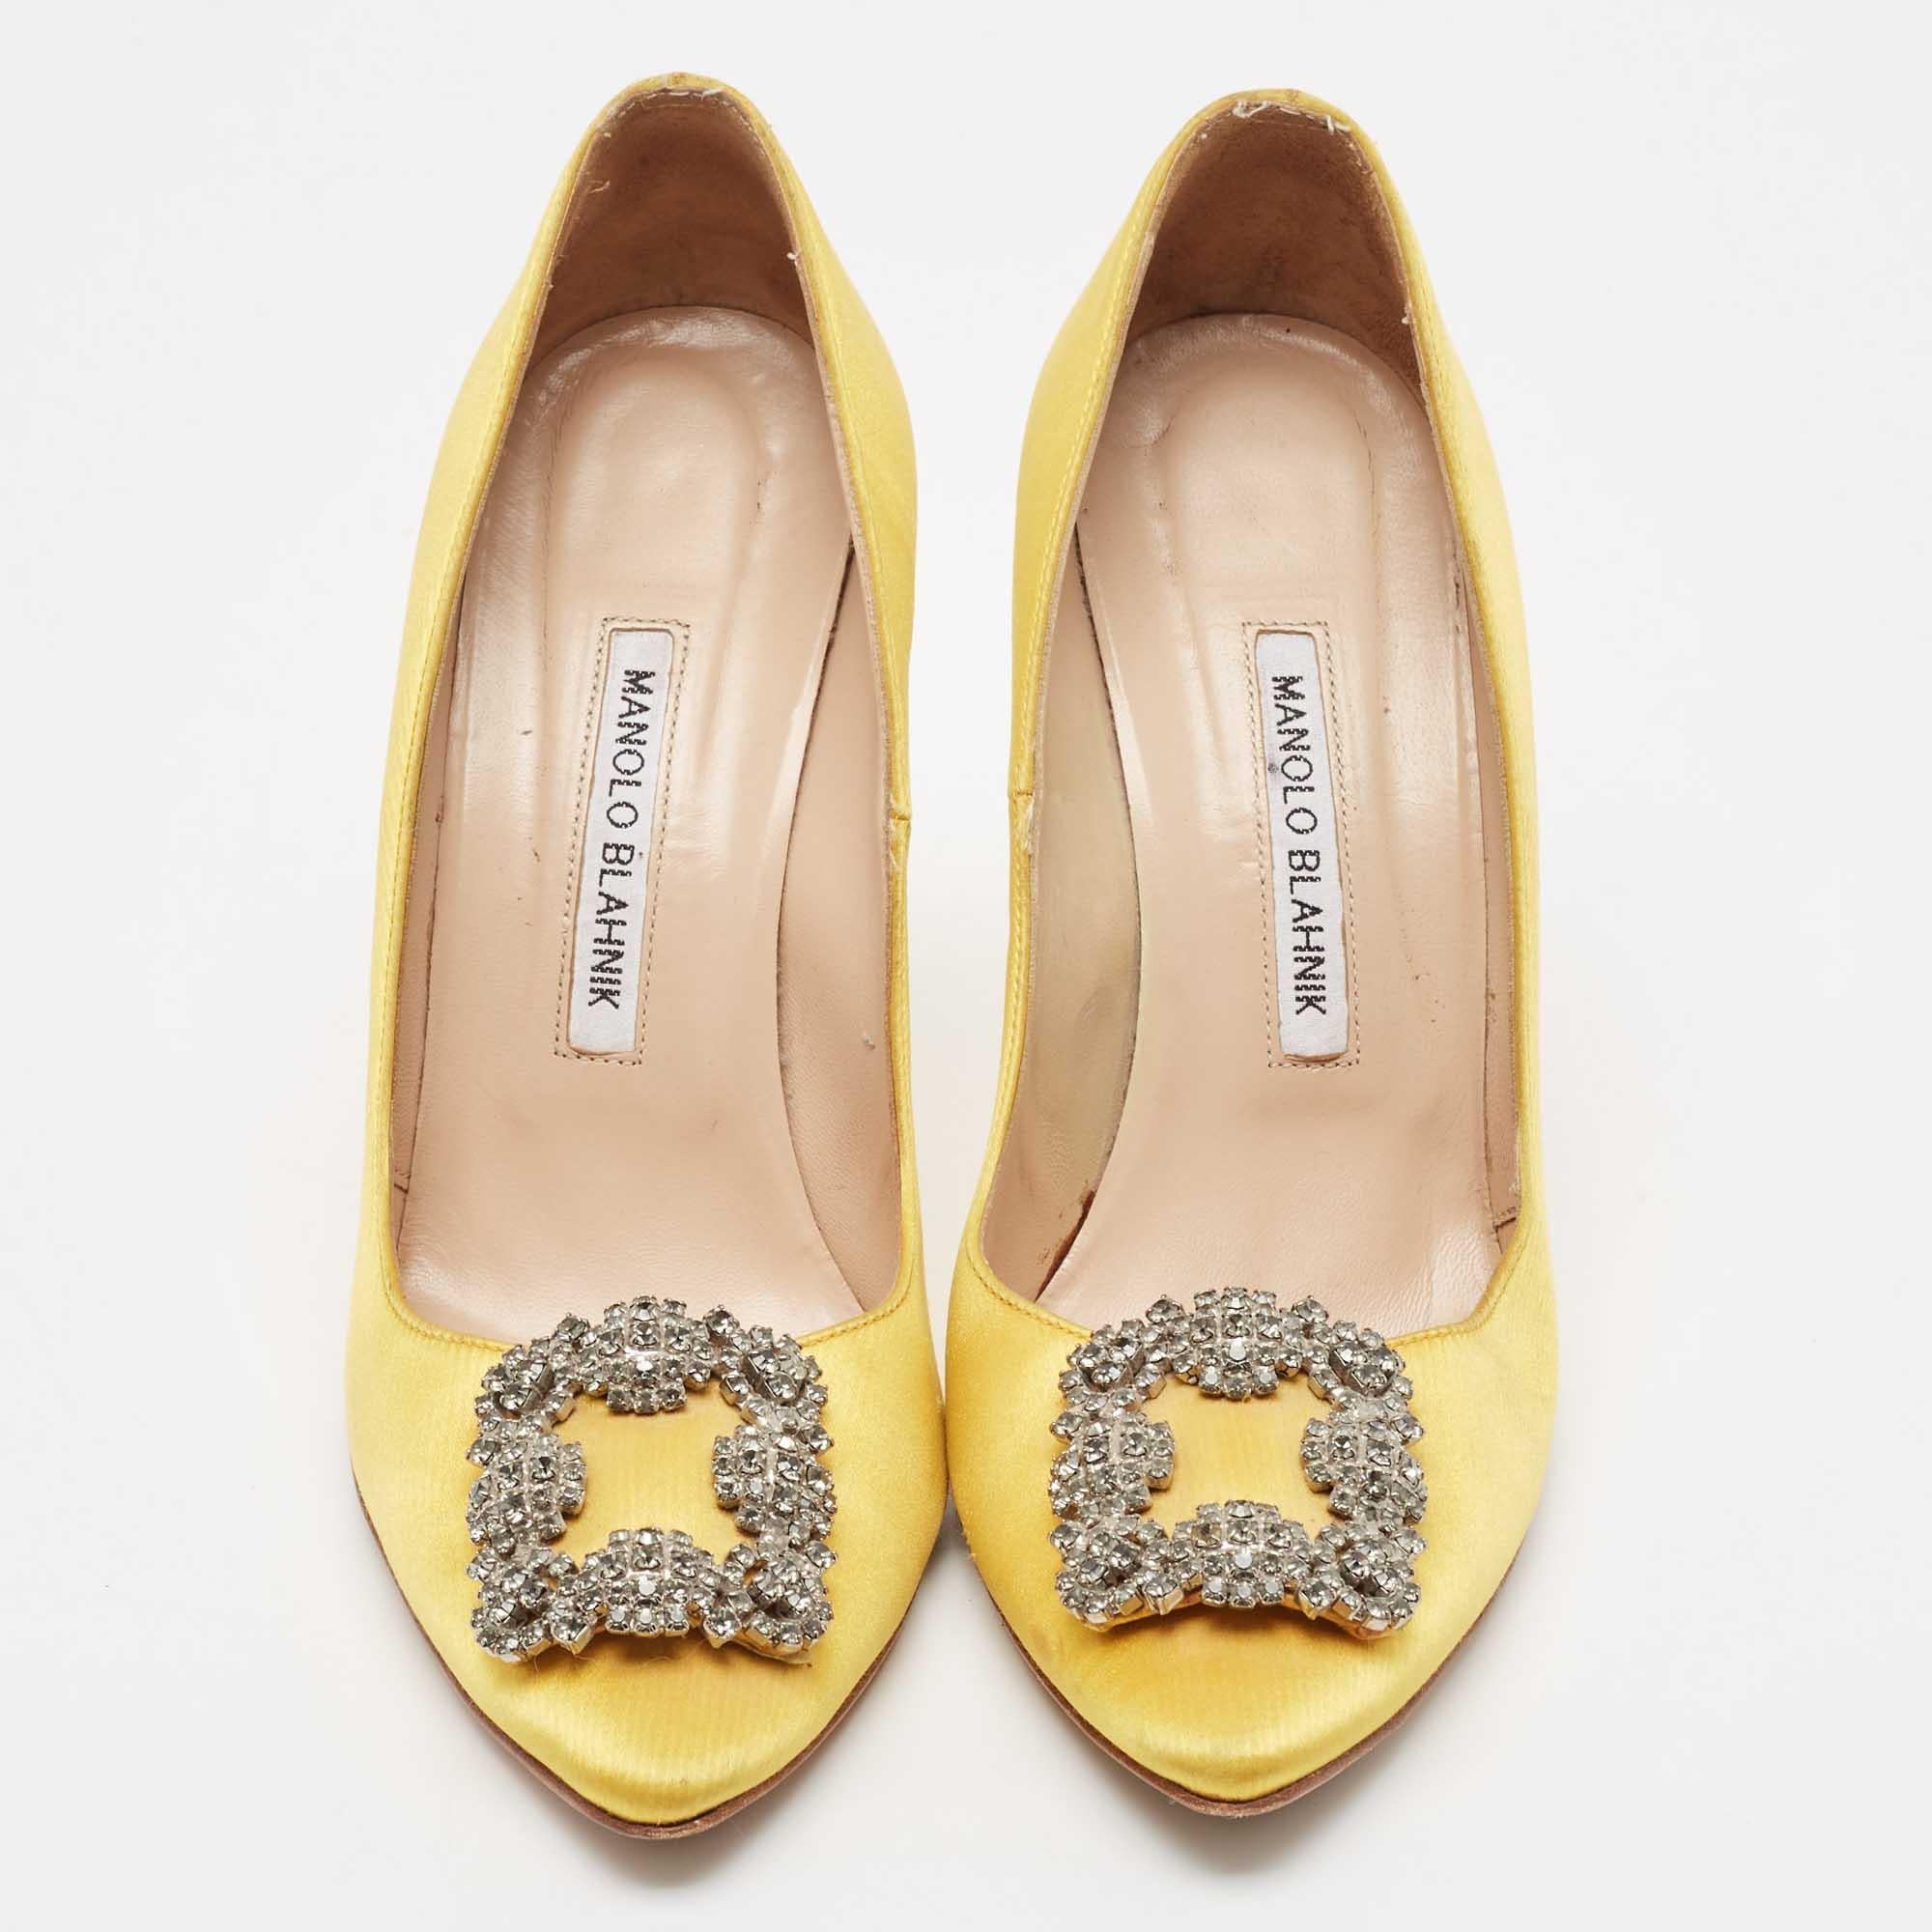 The 11.5cm heels of this pair of Manolo Blahnik pumps will reflect grace and luxury in every step. Made from satin, it is made striking with a crystal-embellished buckle detailing on the toes and exhibits branded insoles.

